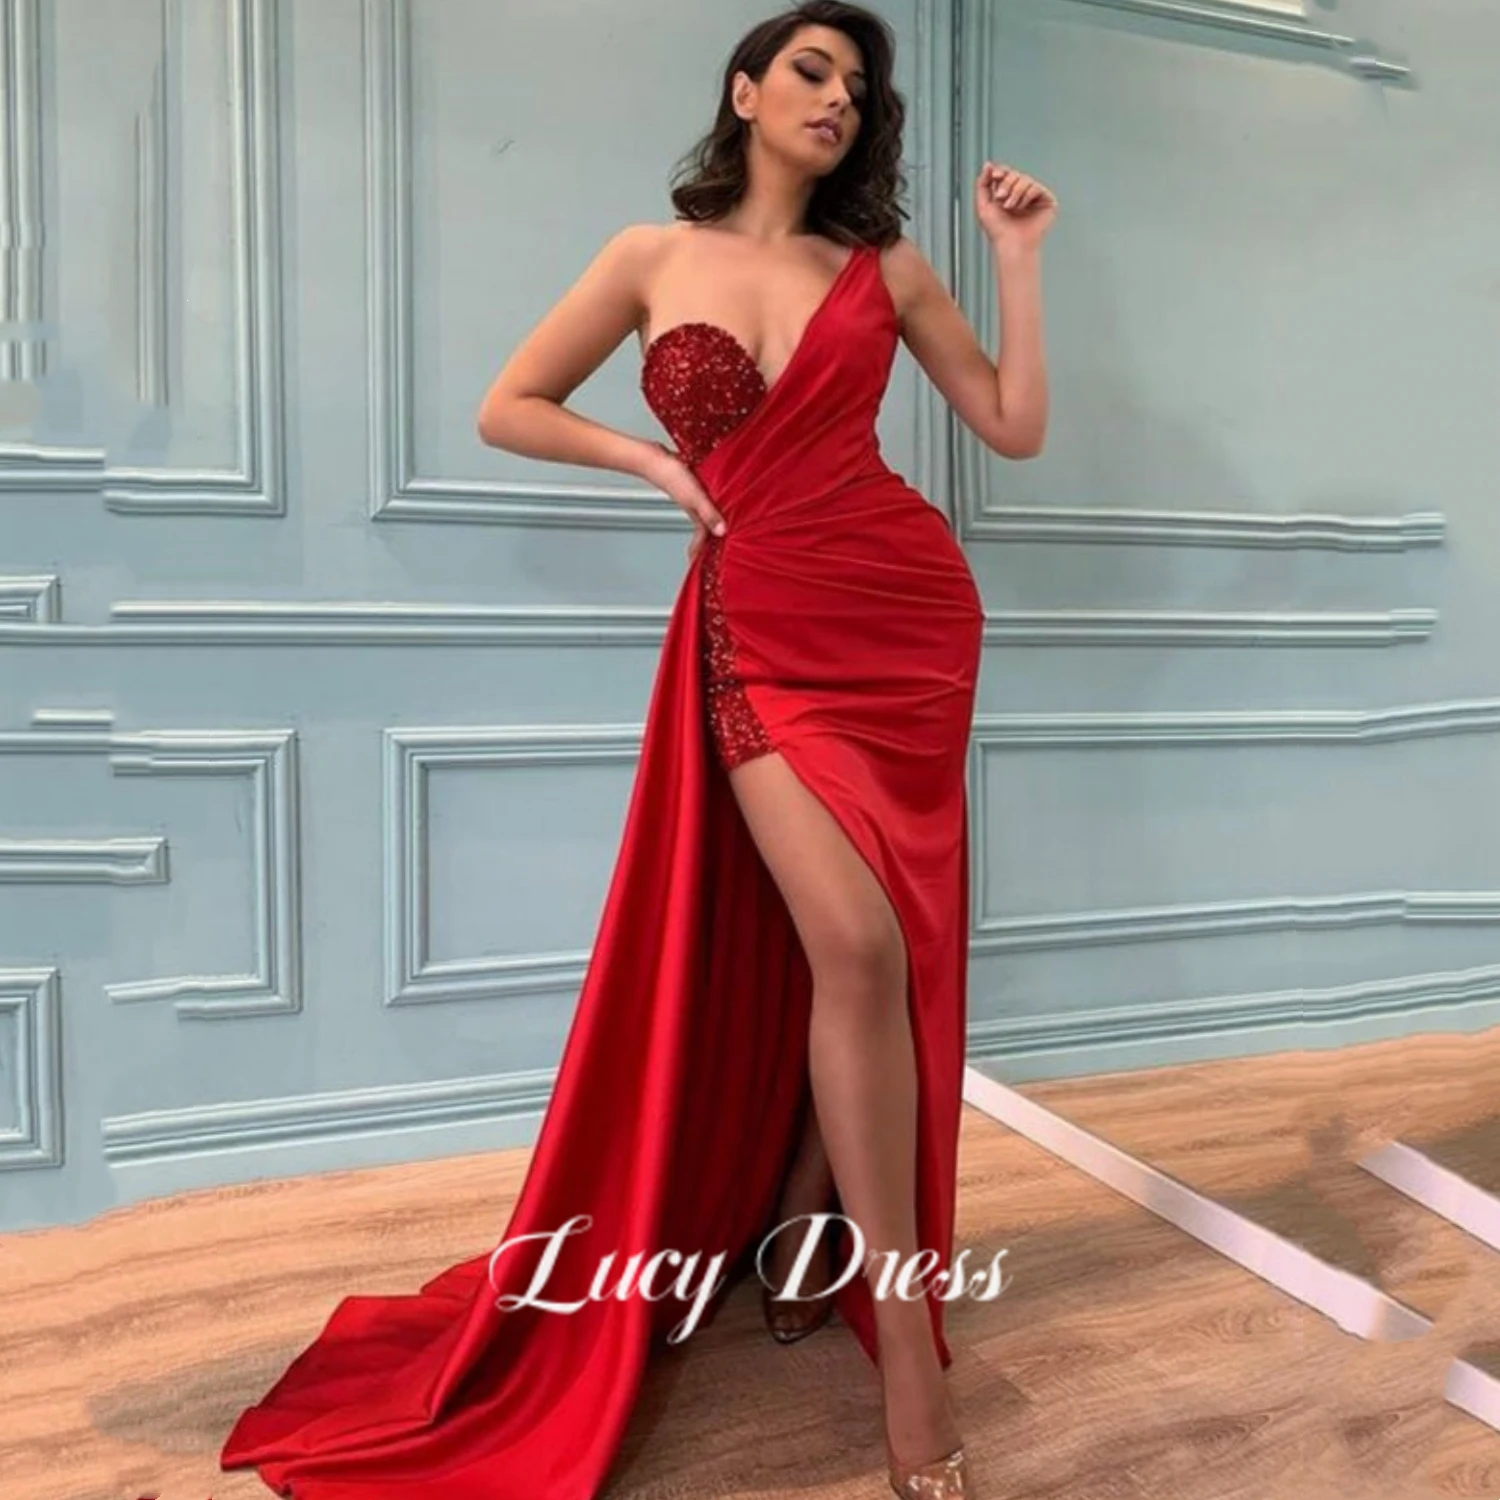 

Lucy Dresses for Women Gala Sequins Female Dress Red Wedding Party Mermaid Womens Dubai Luxury Evening Graduation Prom 2023 Gown